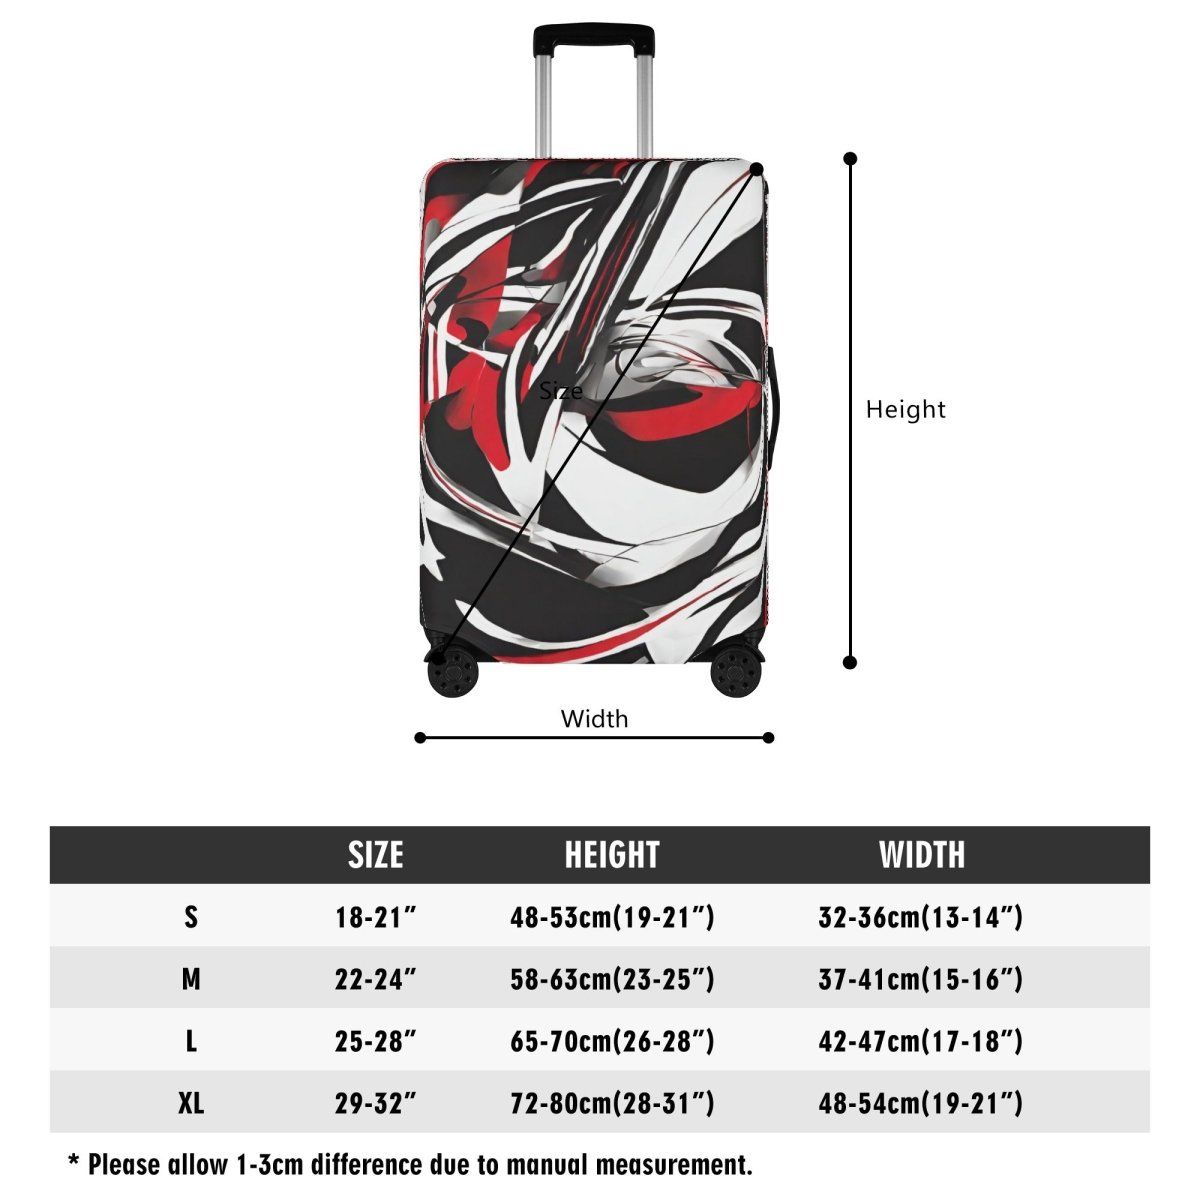 Travel in Style with our Red White and Black Protective Luggage Cover  Avoid Mix-Ups - Iron Phoenix GHG